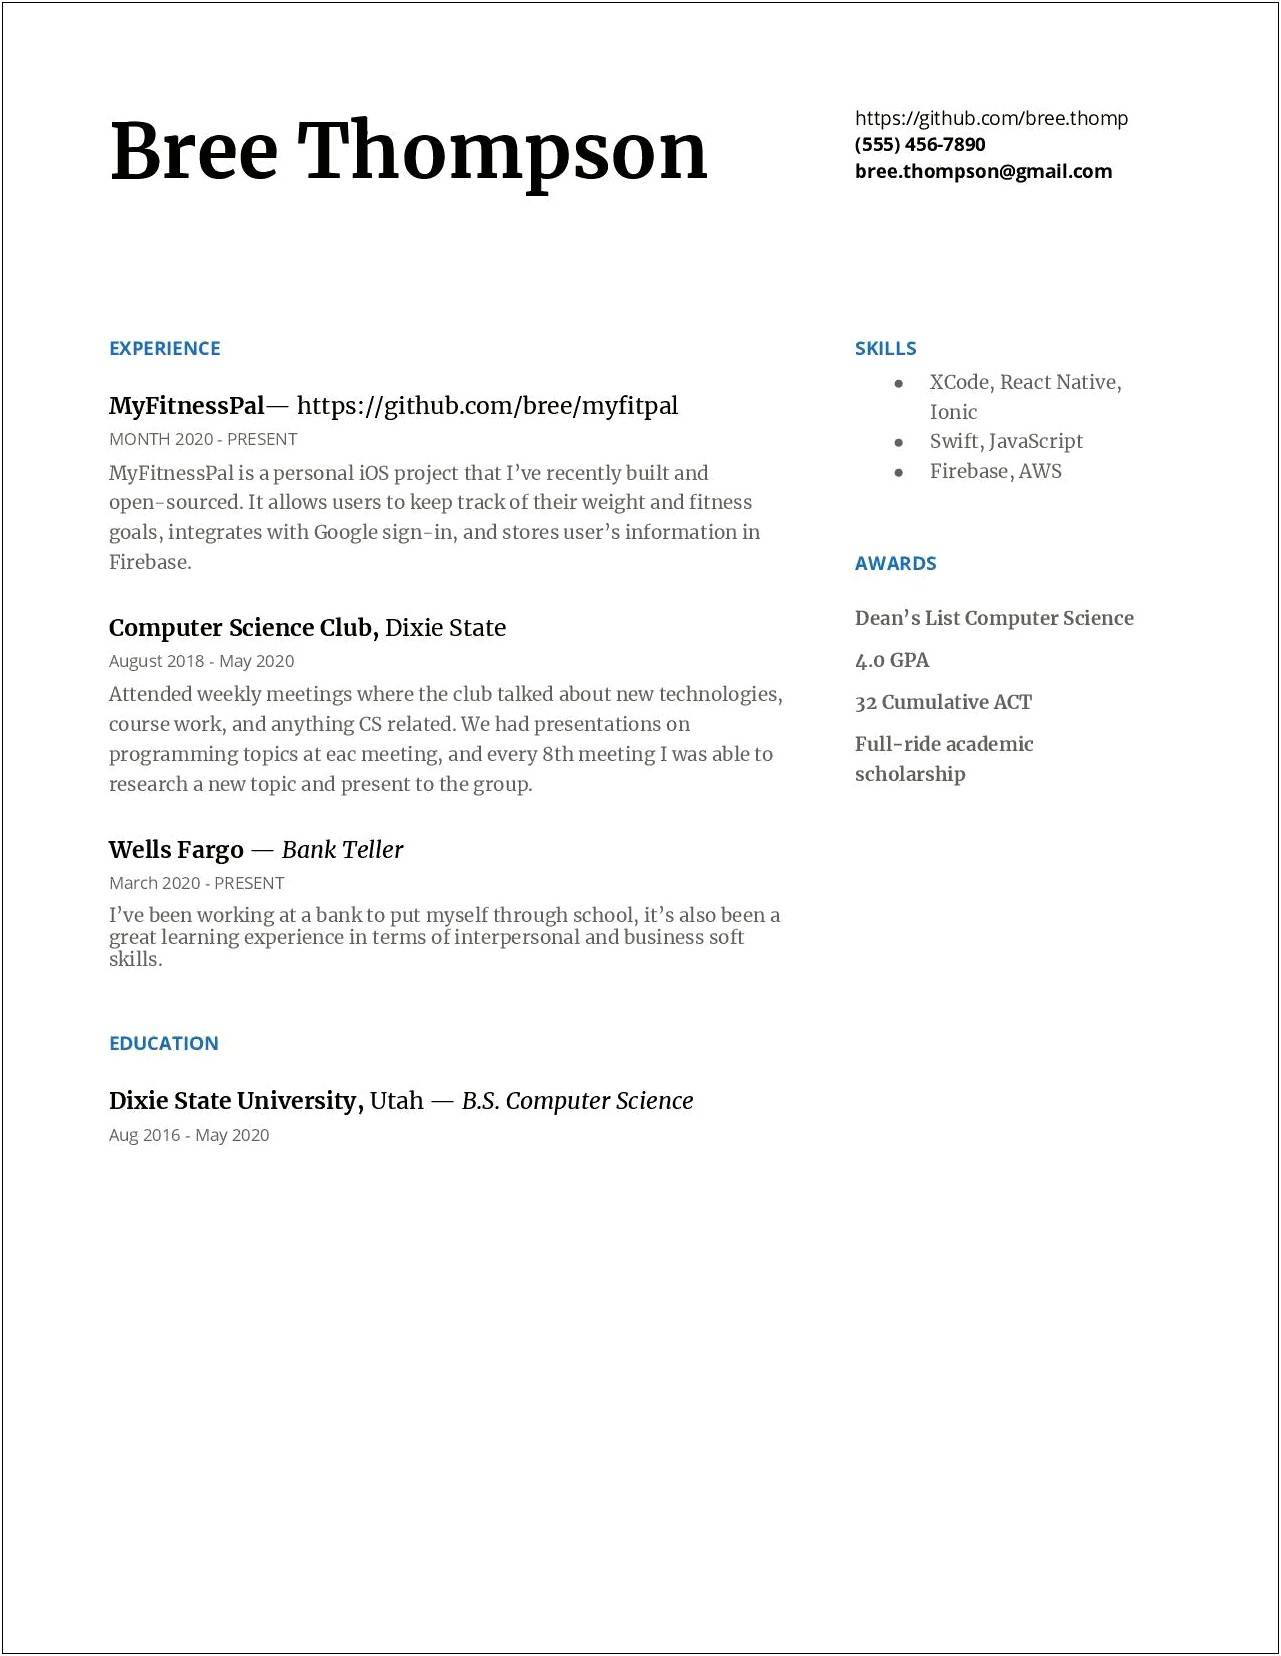 Resume With Summary Critical Thinking As Computer Science